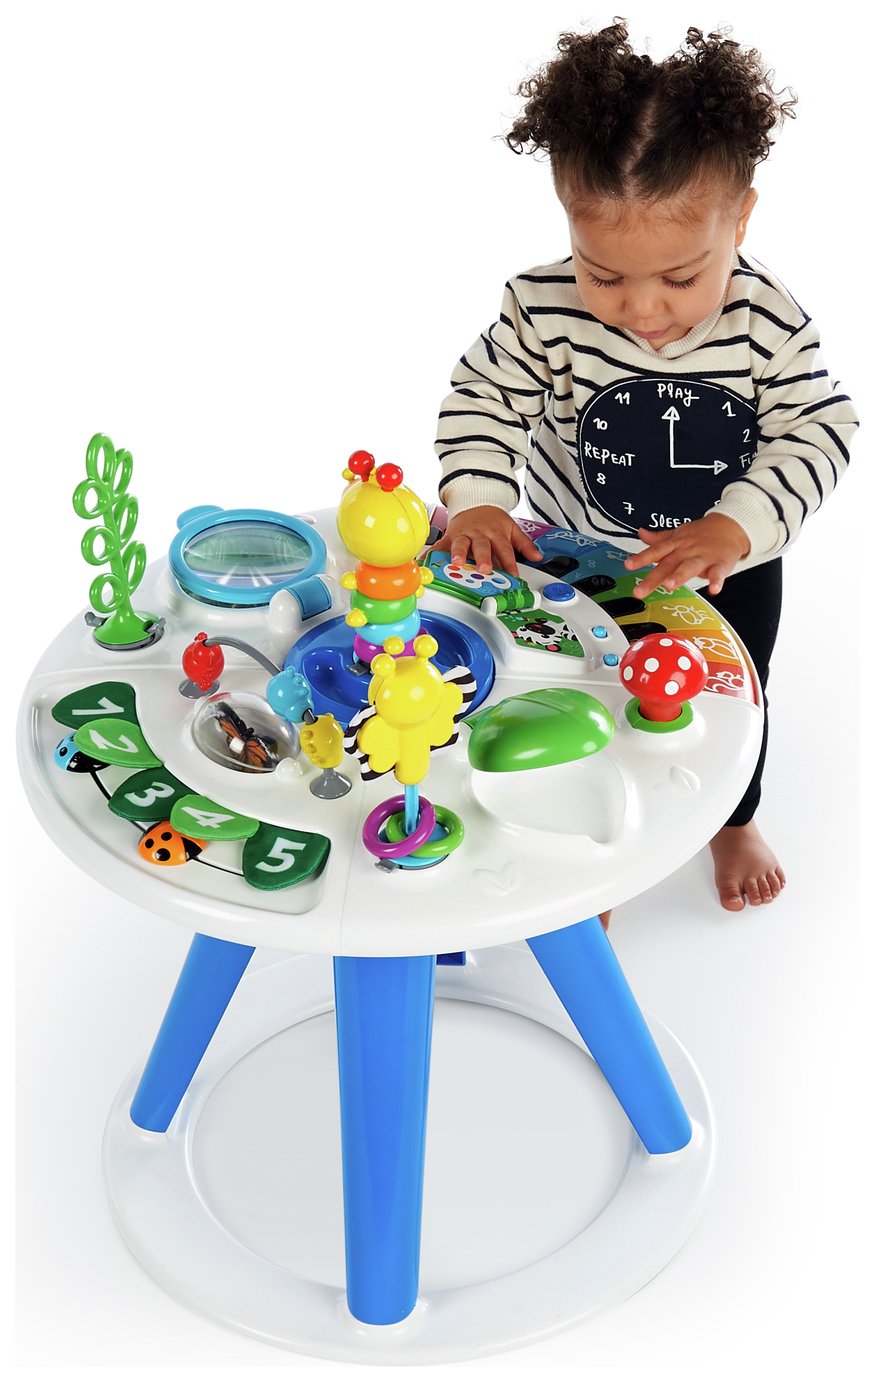 Baby Einstein Around We Grow Discovery Centre review